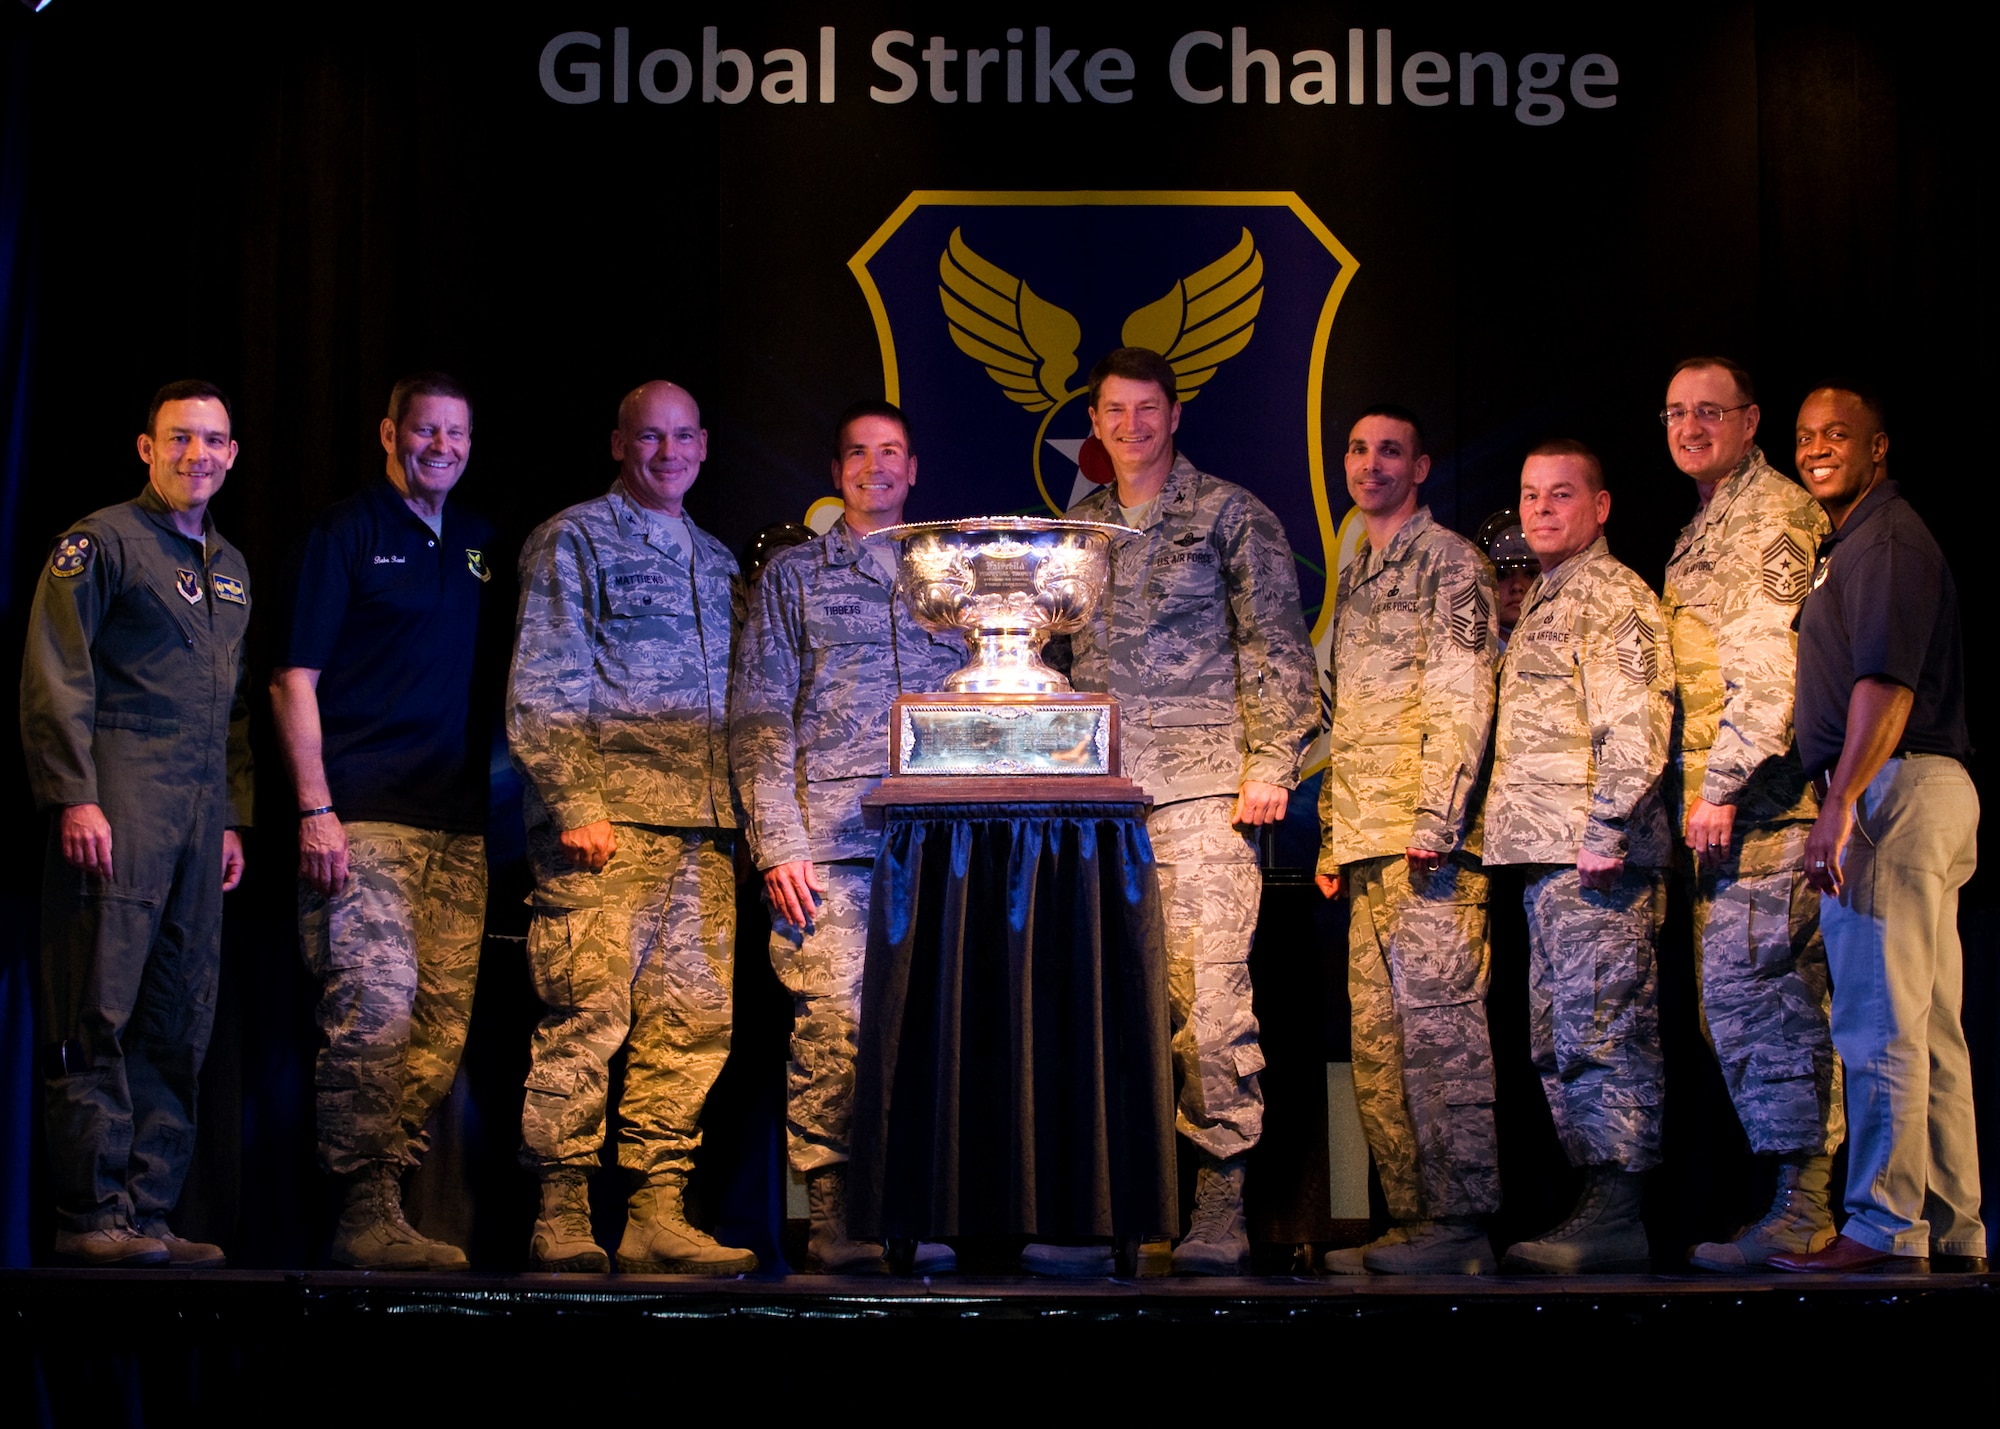 Gen. Robin Rand, commander of Air Force Global Strike Command, presents Brig. Gen. Paul W. Tibbets IV, commander of the 509th Bomb Wing at Whiteman Air Force Base, Mo., the Fairchild Trophy naming the 509th the best bomb wing in the Air Force at the 2015 Global Strike Challenge trophy presentation at Barksdale AFB, La., Oct. 21, 2015. After months of fierce competition, the ‘best of the best’ were named among Global Strike Challenge teams around Air Force Global Strike Command, Air Combat Command, Air Force Reserve Command and the Air National Guard. (U.S. Air Force photo/Senior Airman Joseph Raatz)